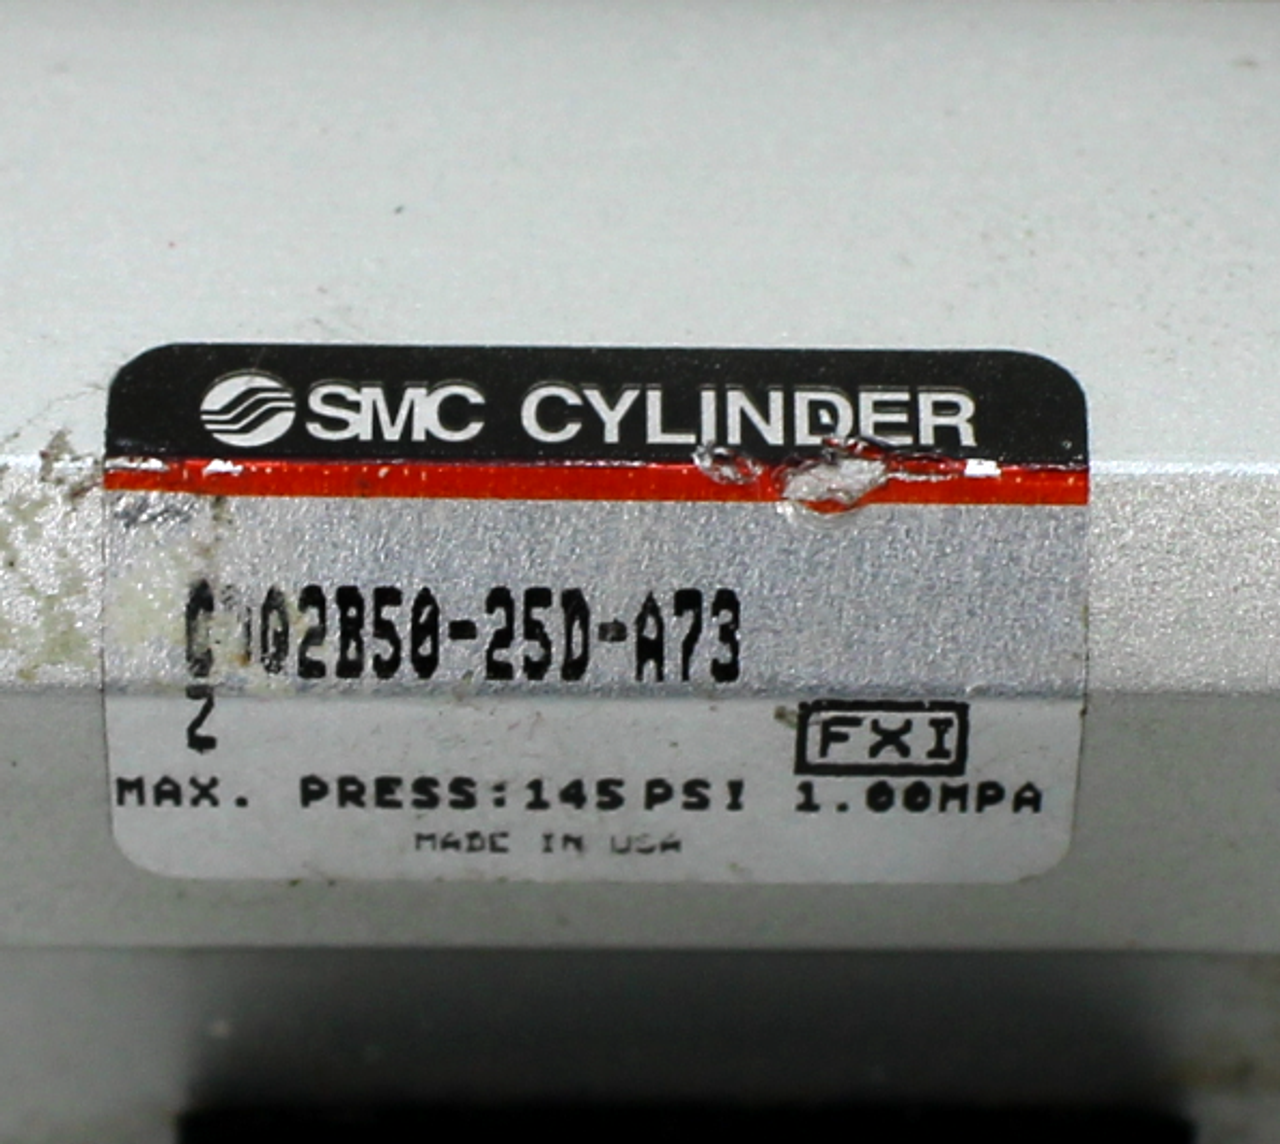 SMC CDQ2B50-25D-A73 Compact Cylinder, 50mm Bore, 25mm Stroke